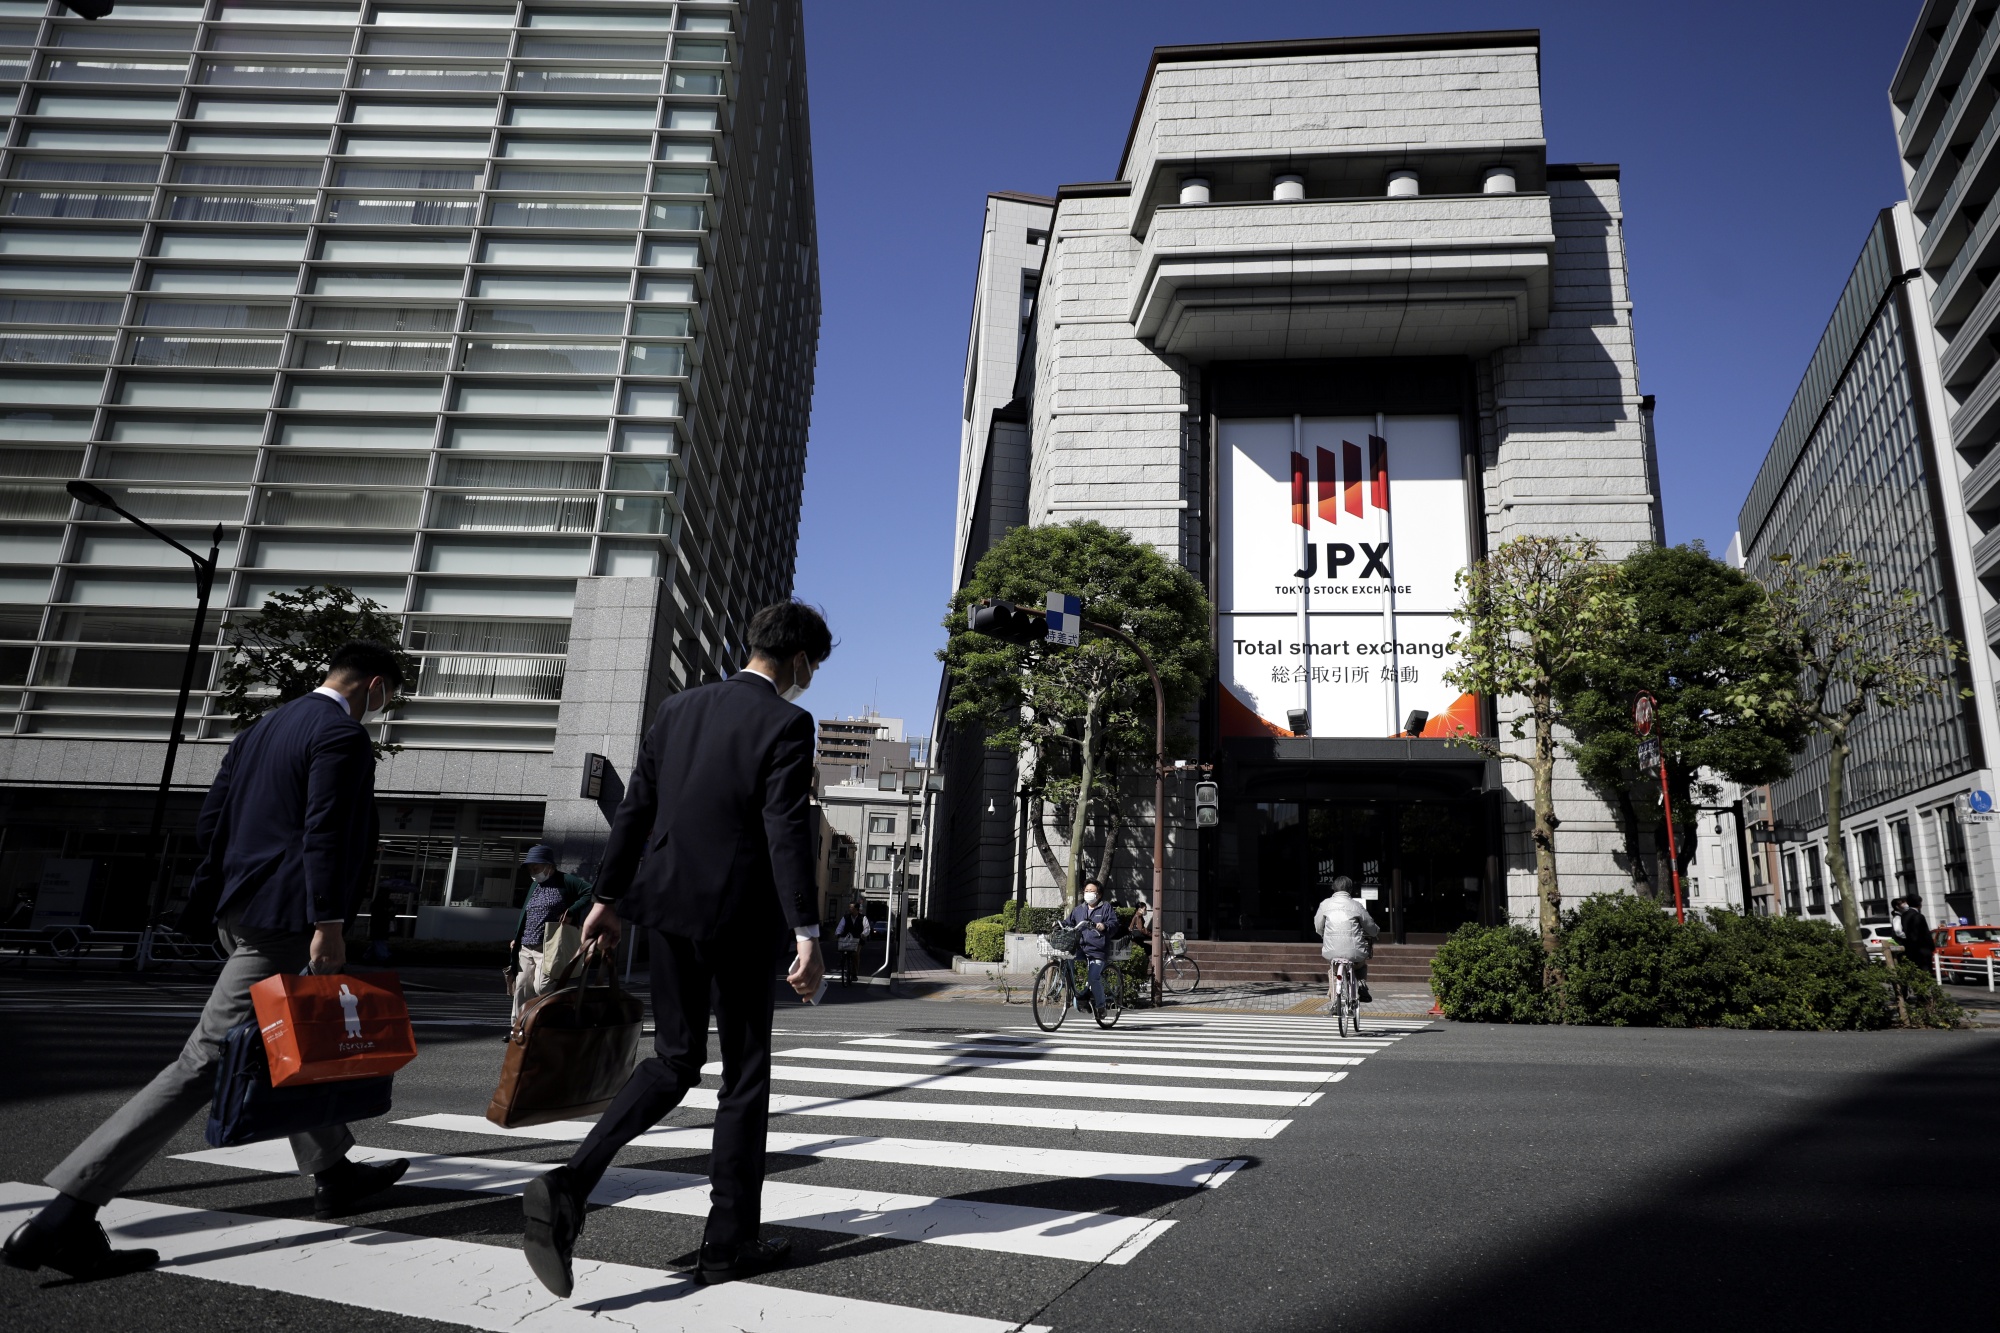 Tokyo Stock Exchange to Discuss Longer Cash Equity Trading Hours